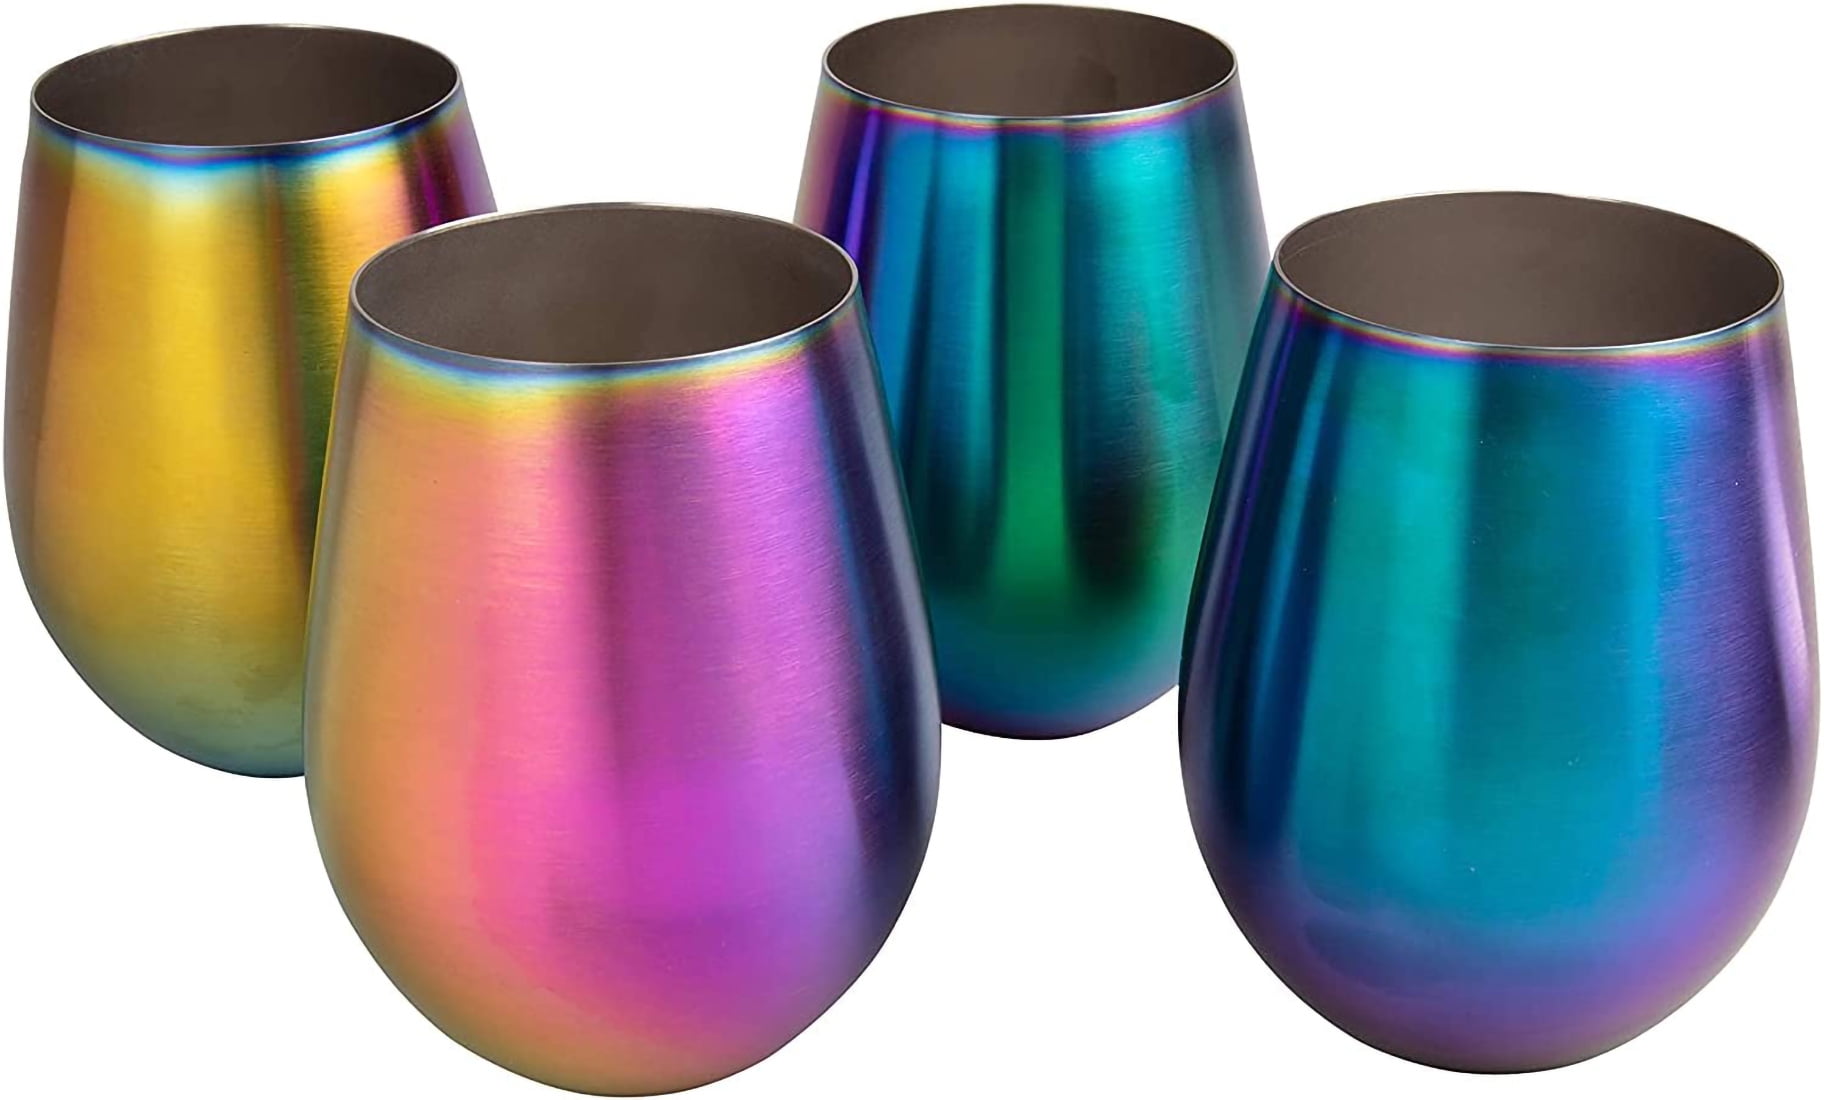 True Silicone Wrapped Wine Glasses, Stemless Glass Tumblers, Dishwasher  Safe Drinkware, 16 Oz Multicolor Set of 4